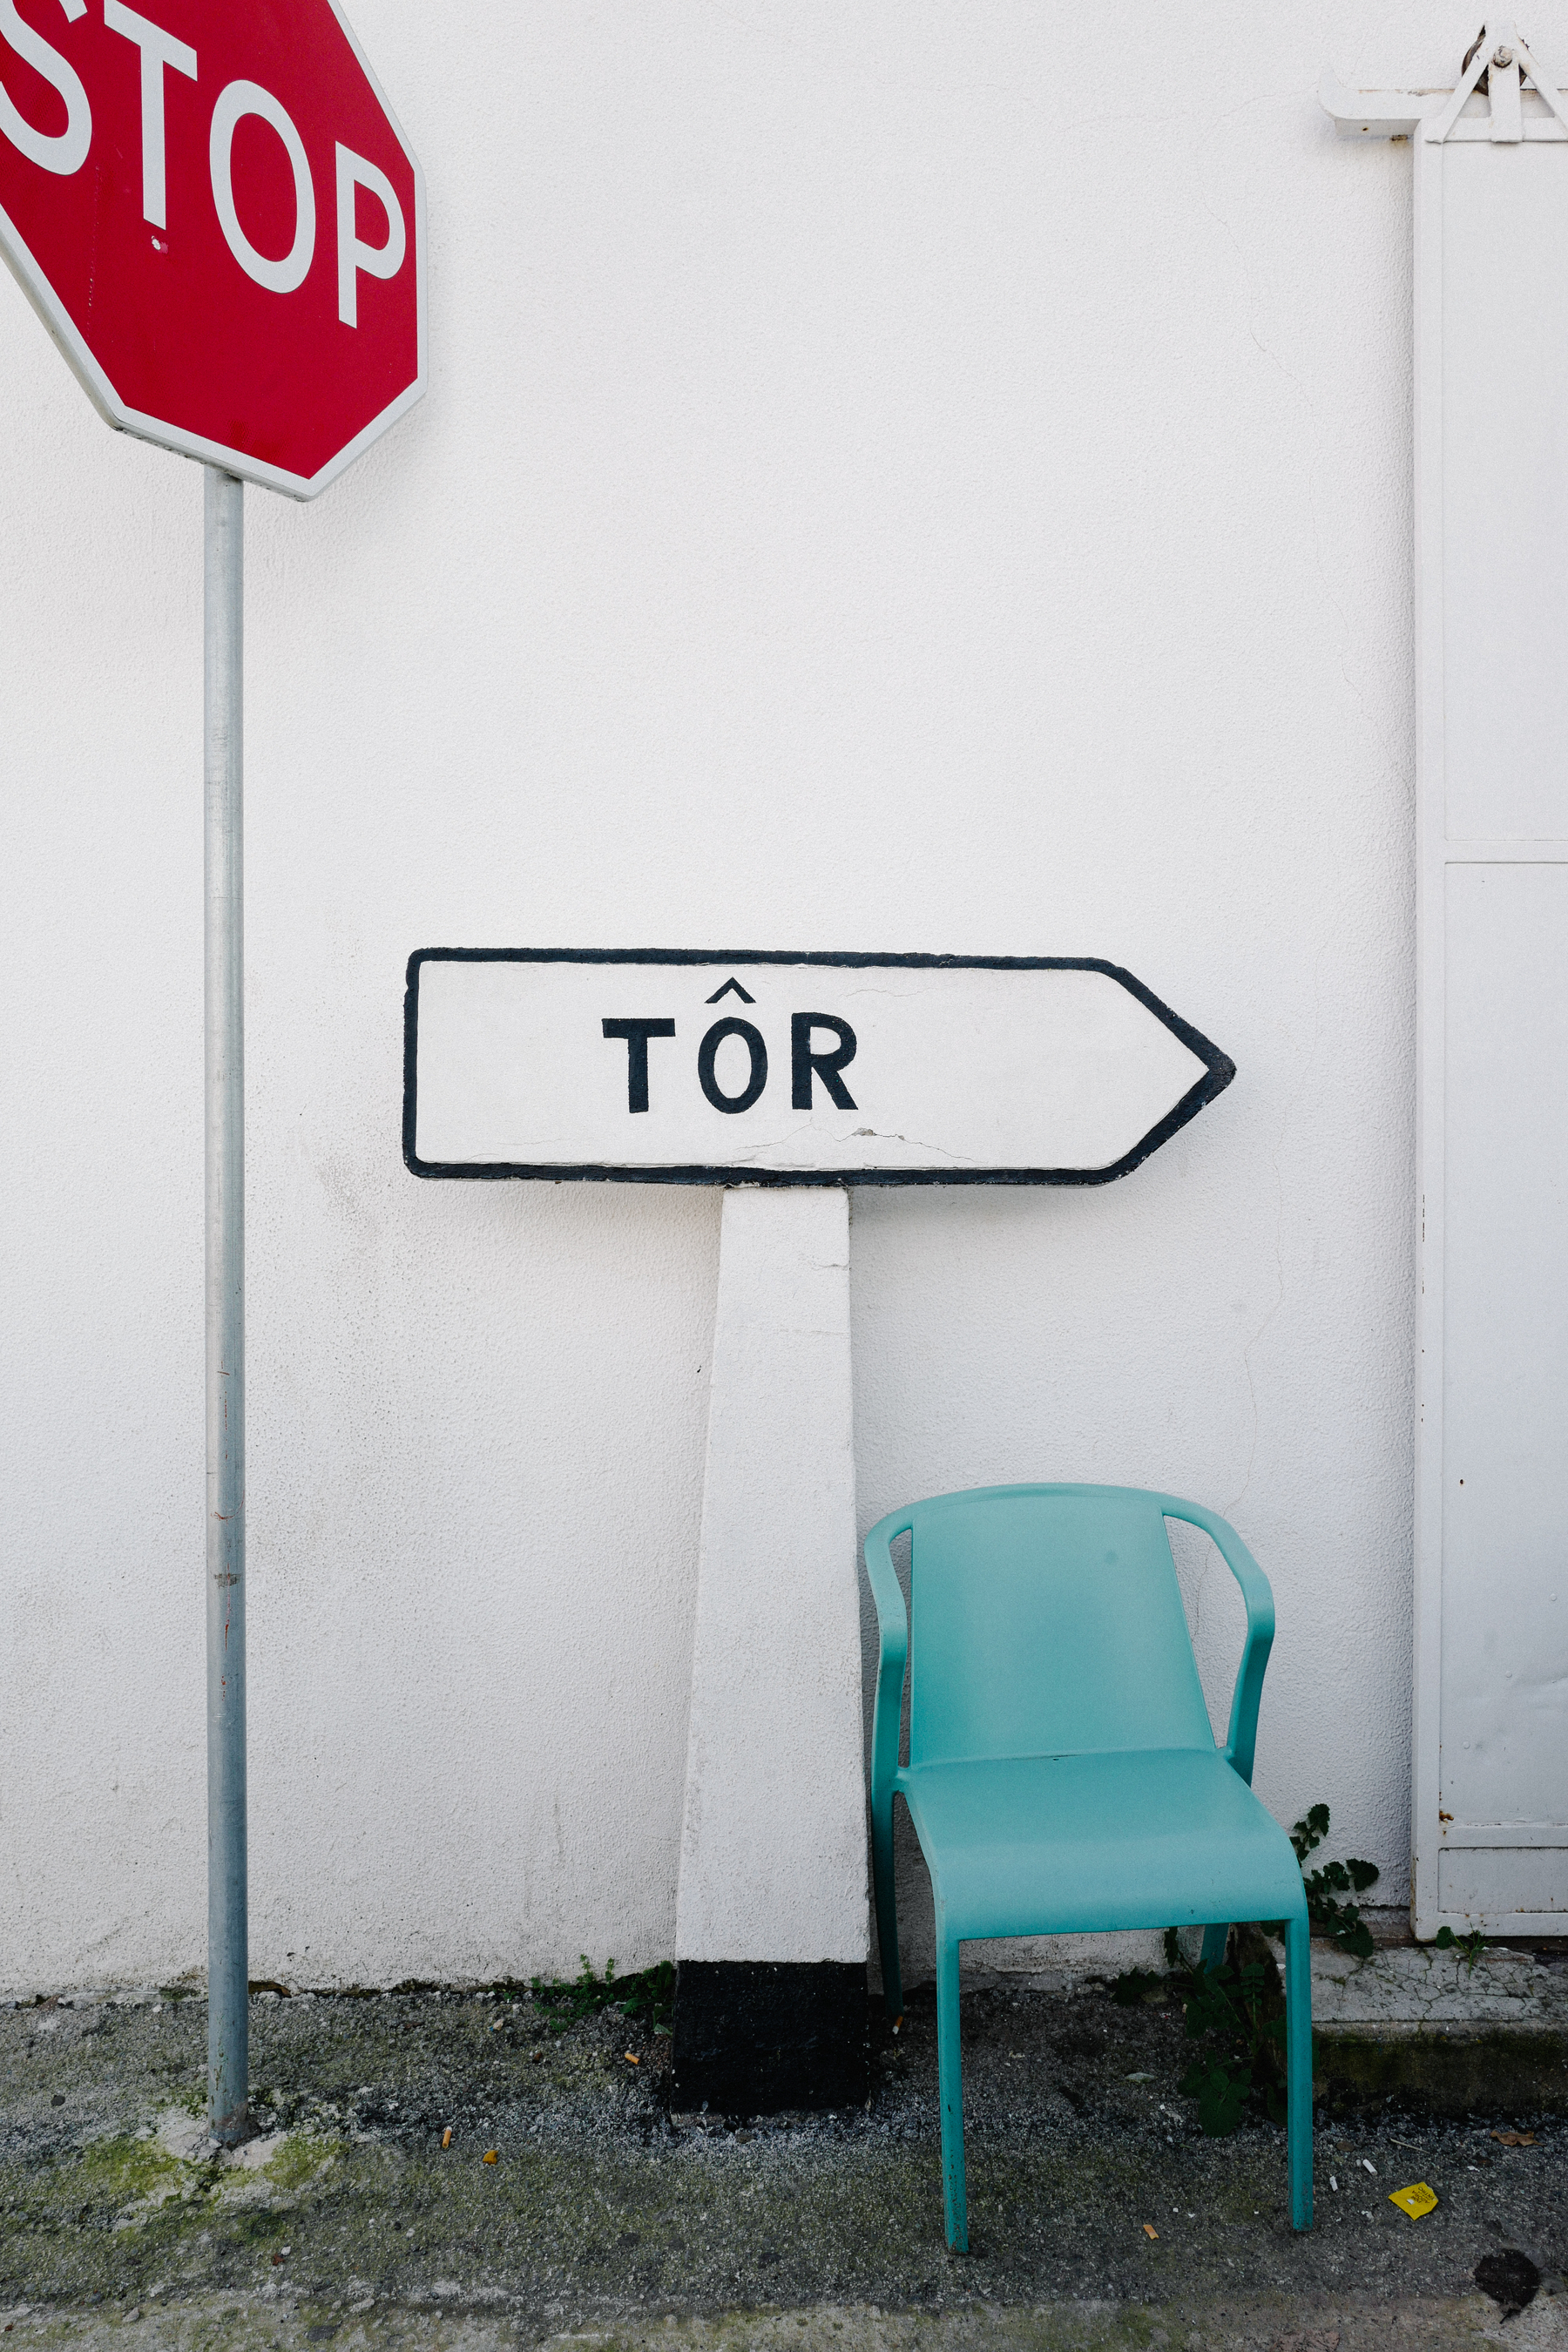 A stop sign, a directional arrow sign with the word &ldquo;TÔR,&rdquo; and a single turquoise chair against a white wall.